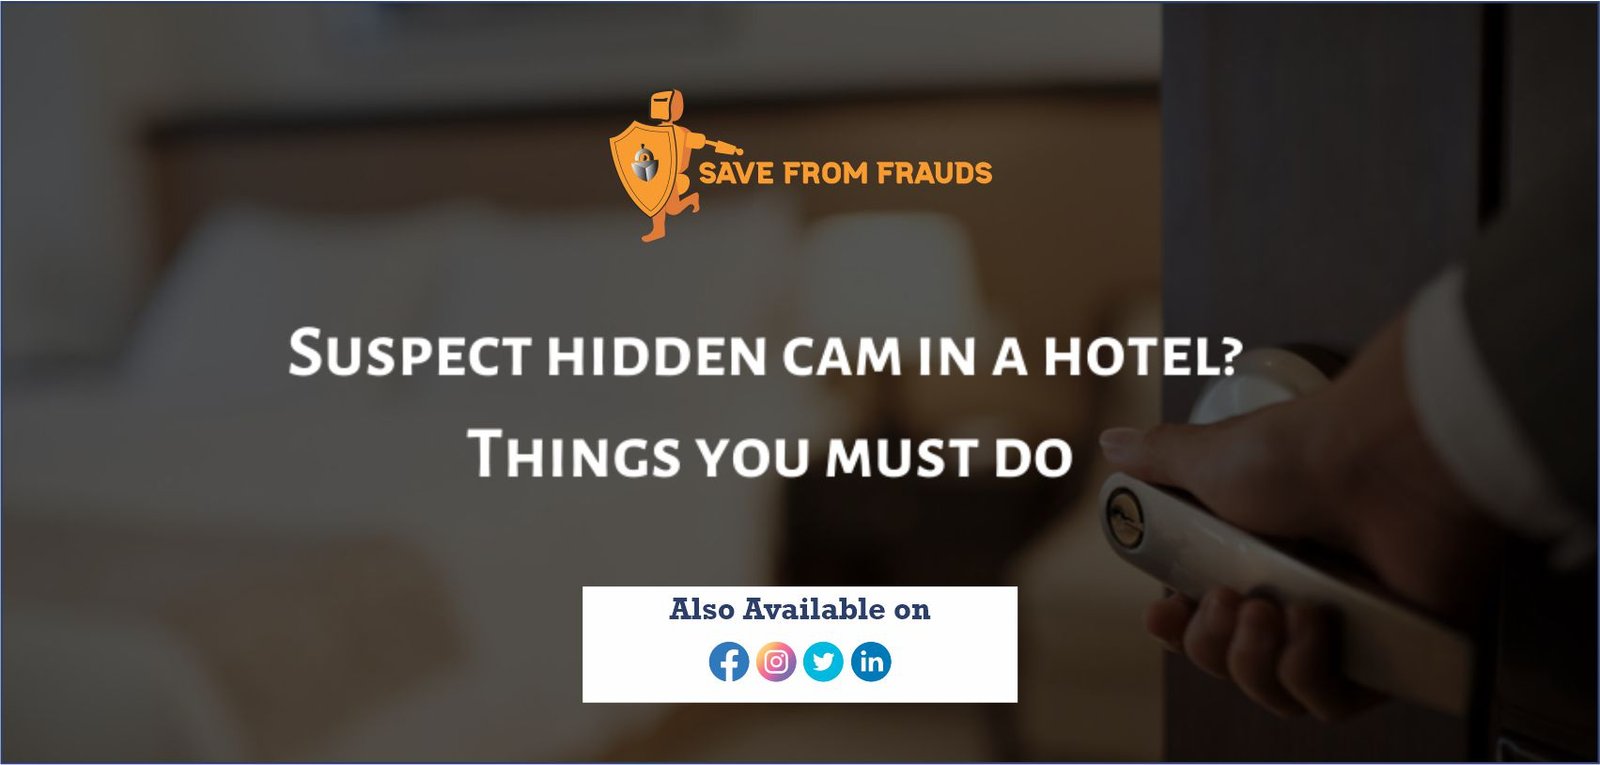 Suspect hidden cam in a hotel? Things you must do